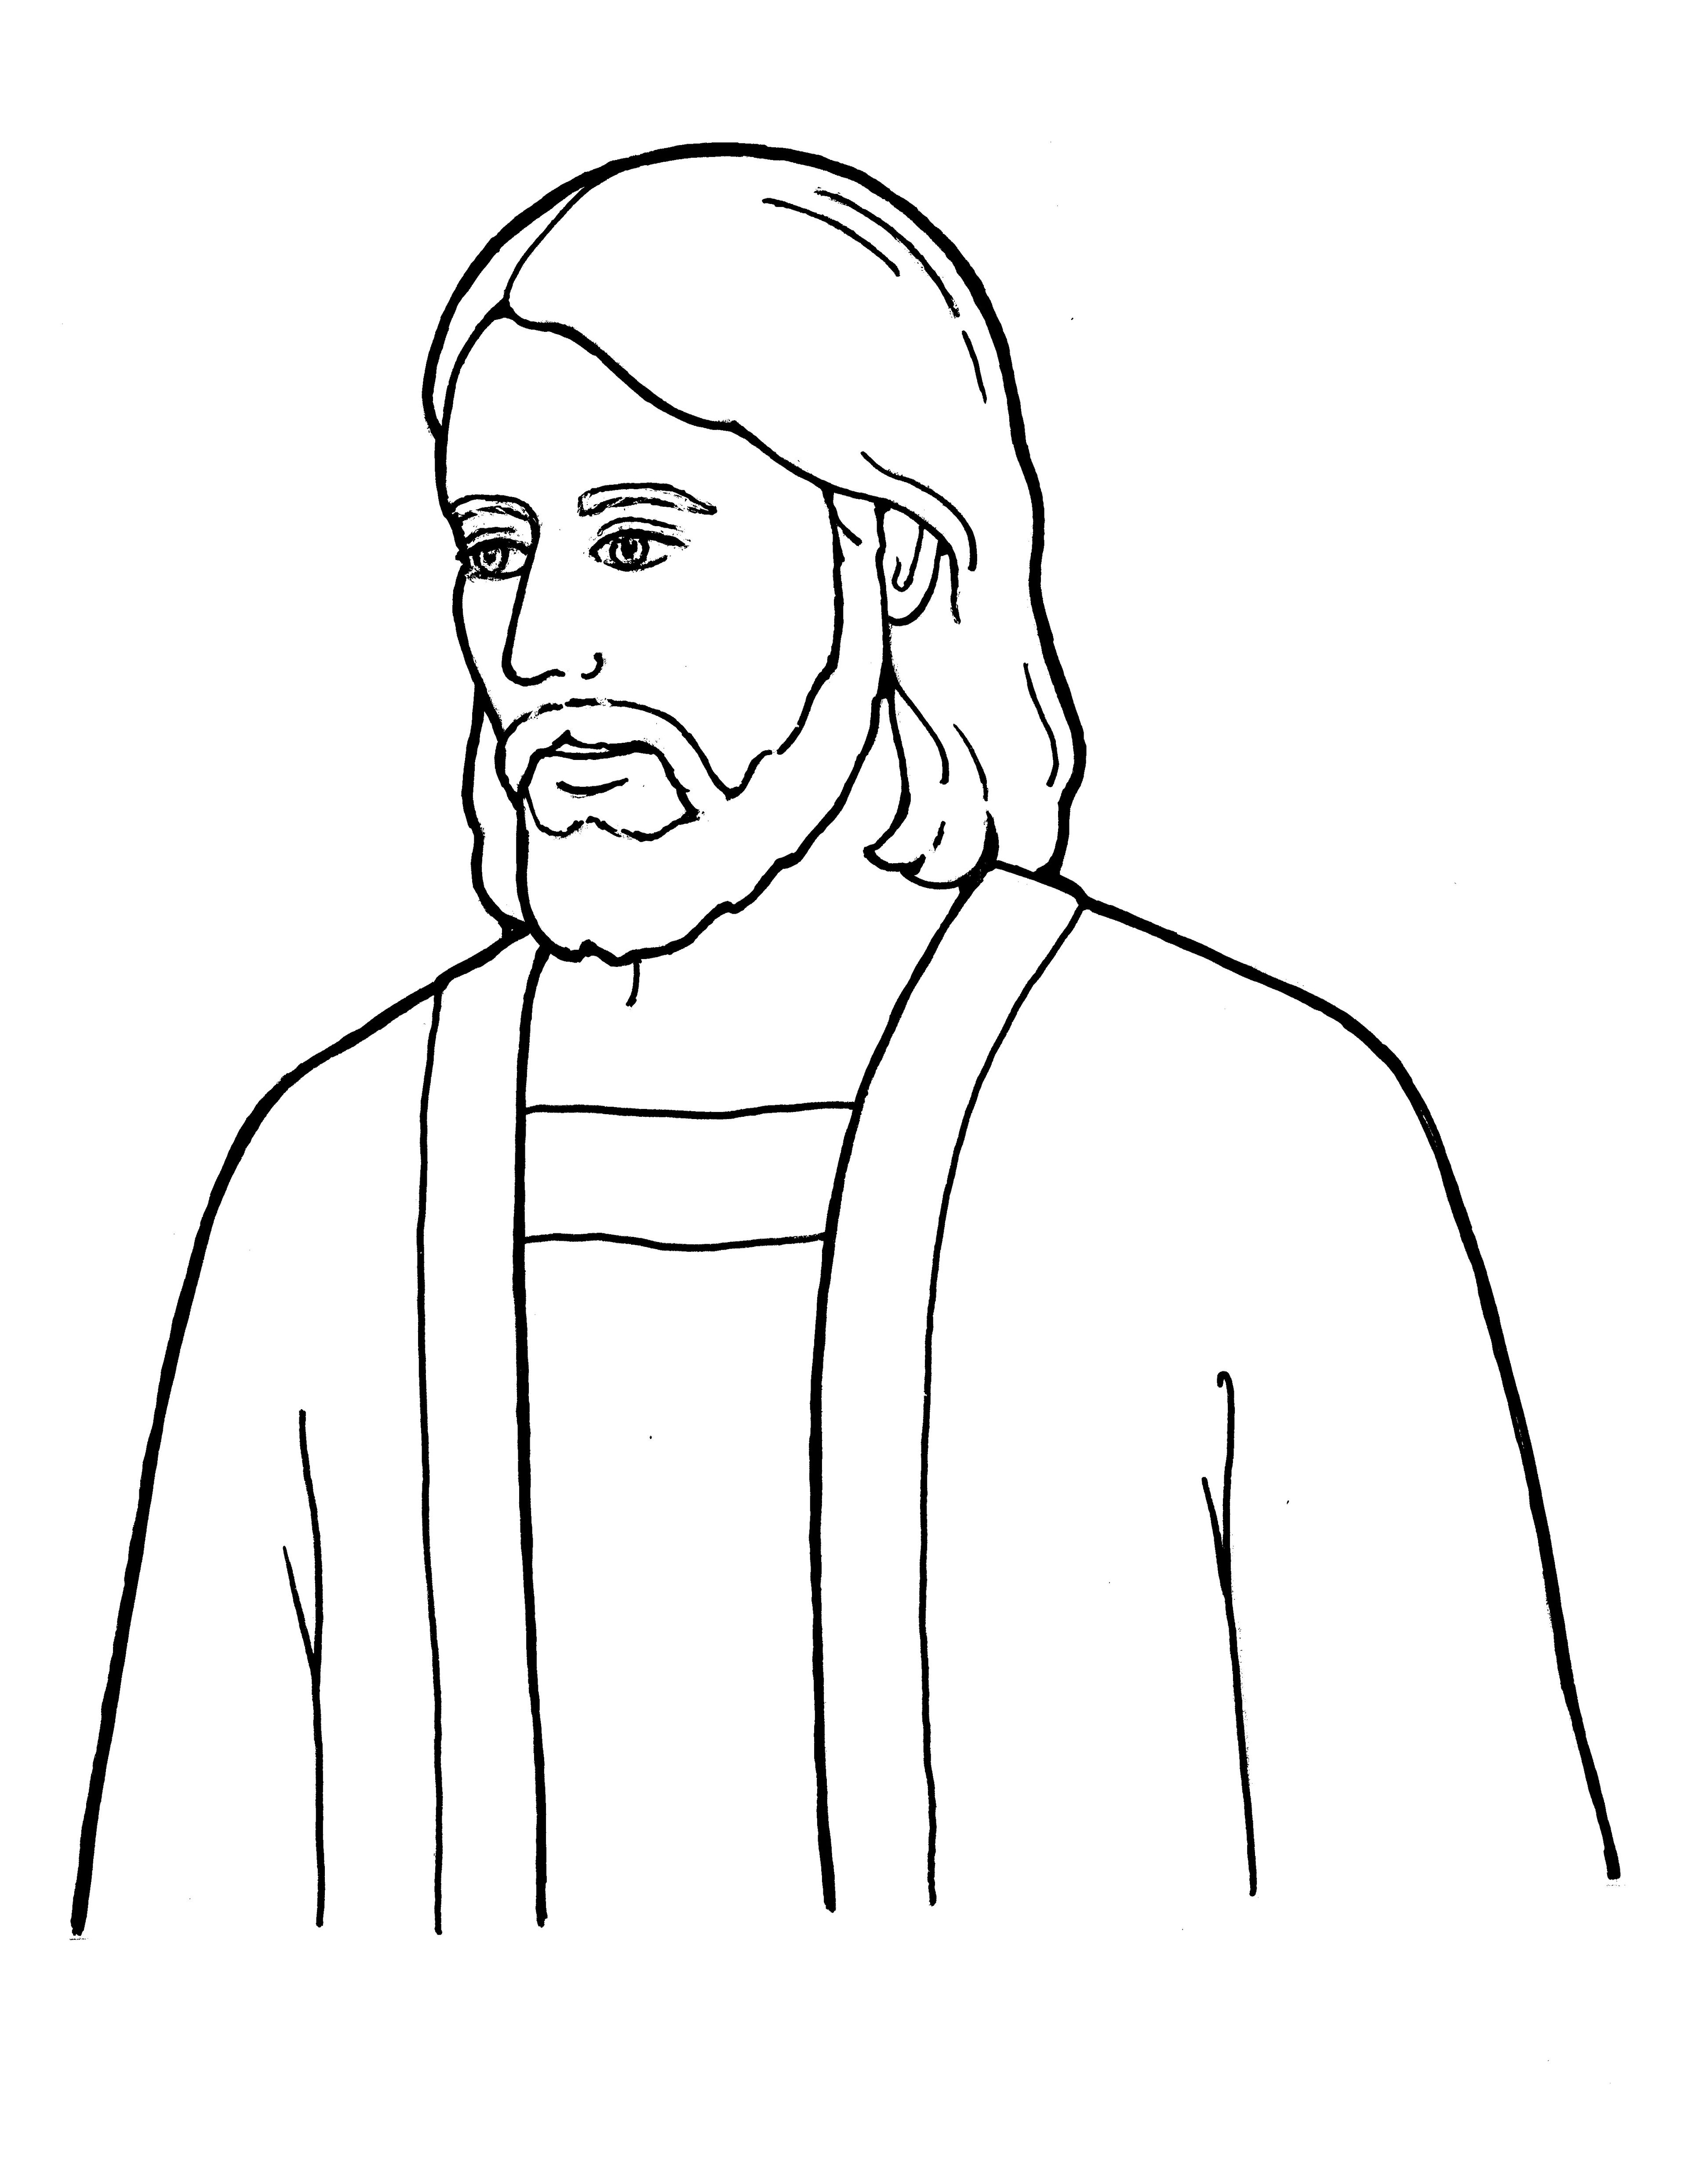 An illustration of Jesus Christ from the nursery manual Behold Your Little Ones (2008); see pages 19, 39, 107, and 115.